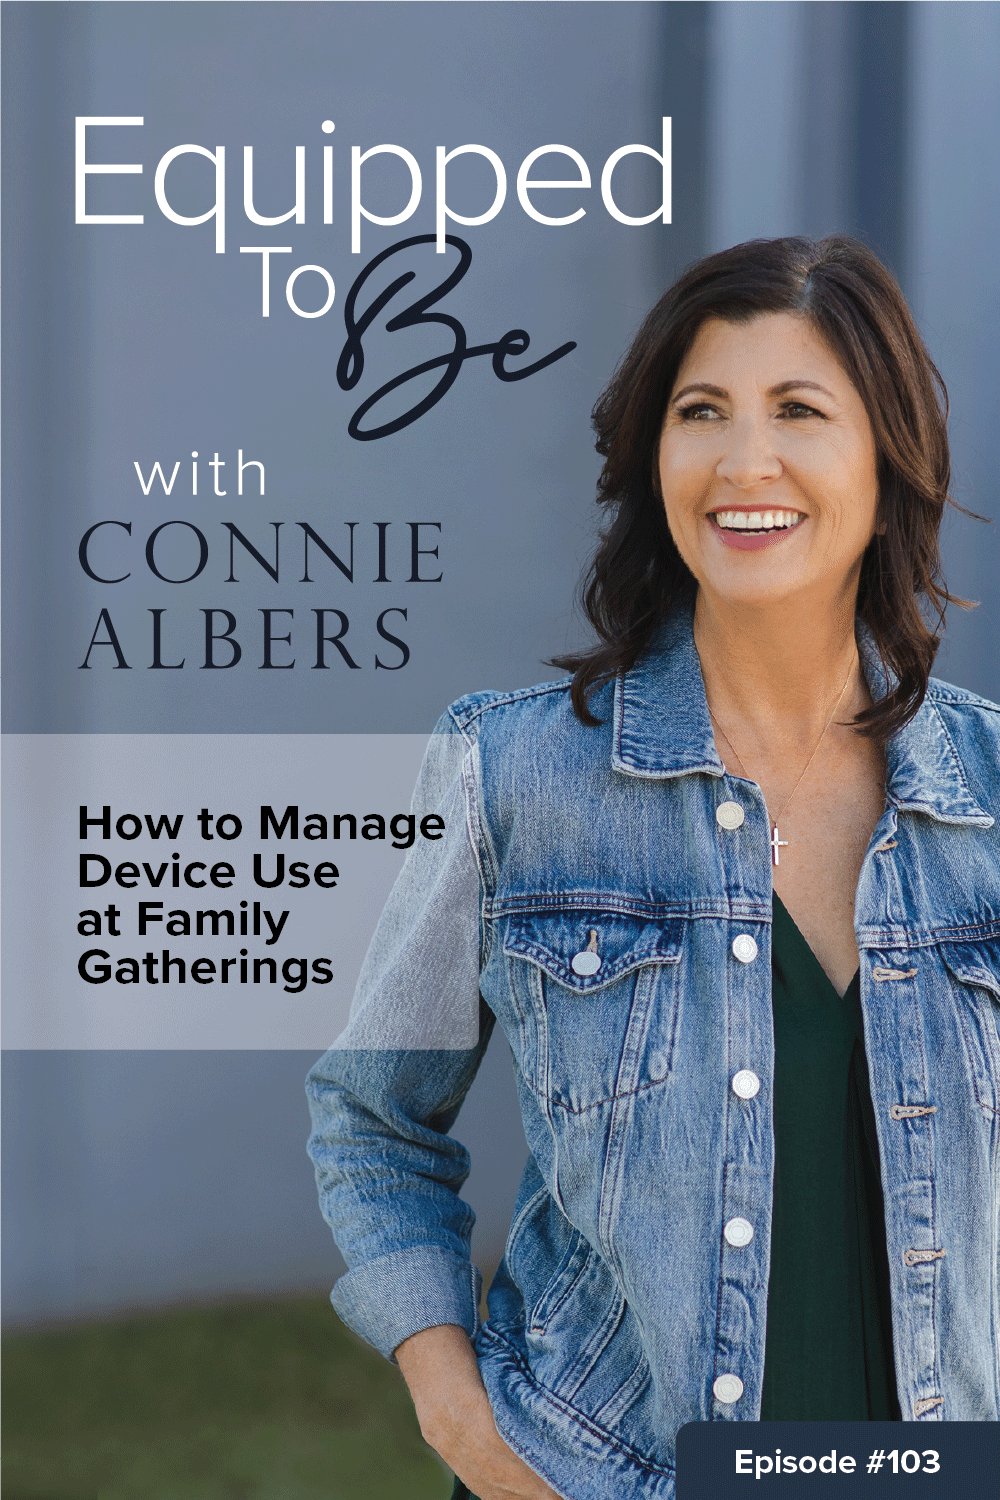 How to Manage Device Use at Family Gatherings - ETB #103